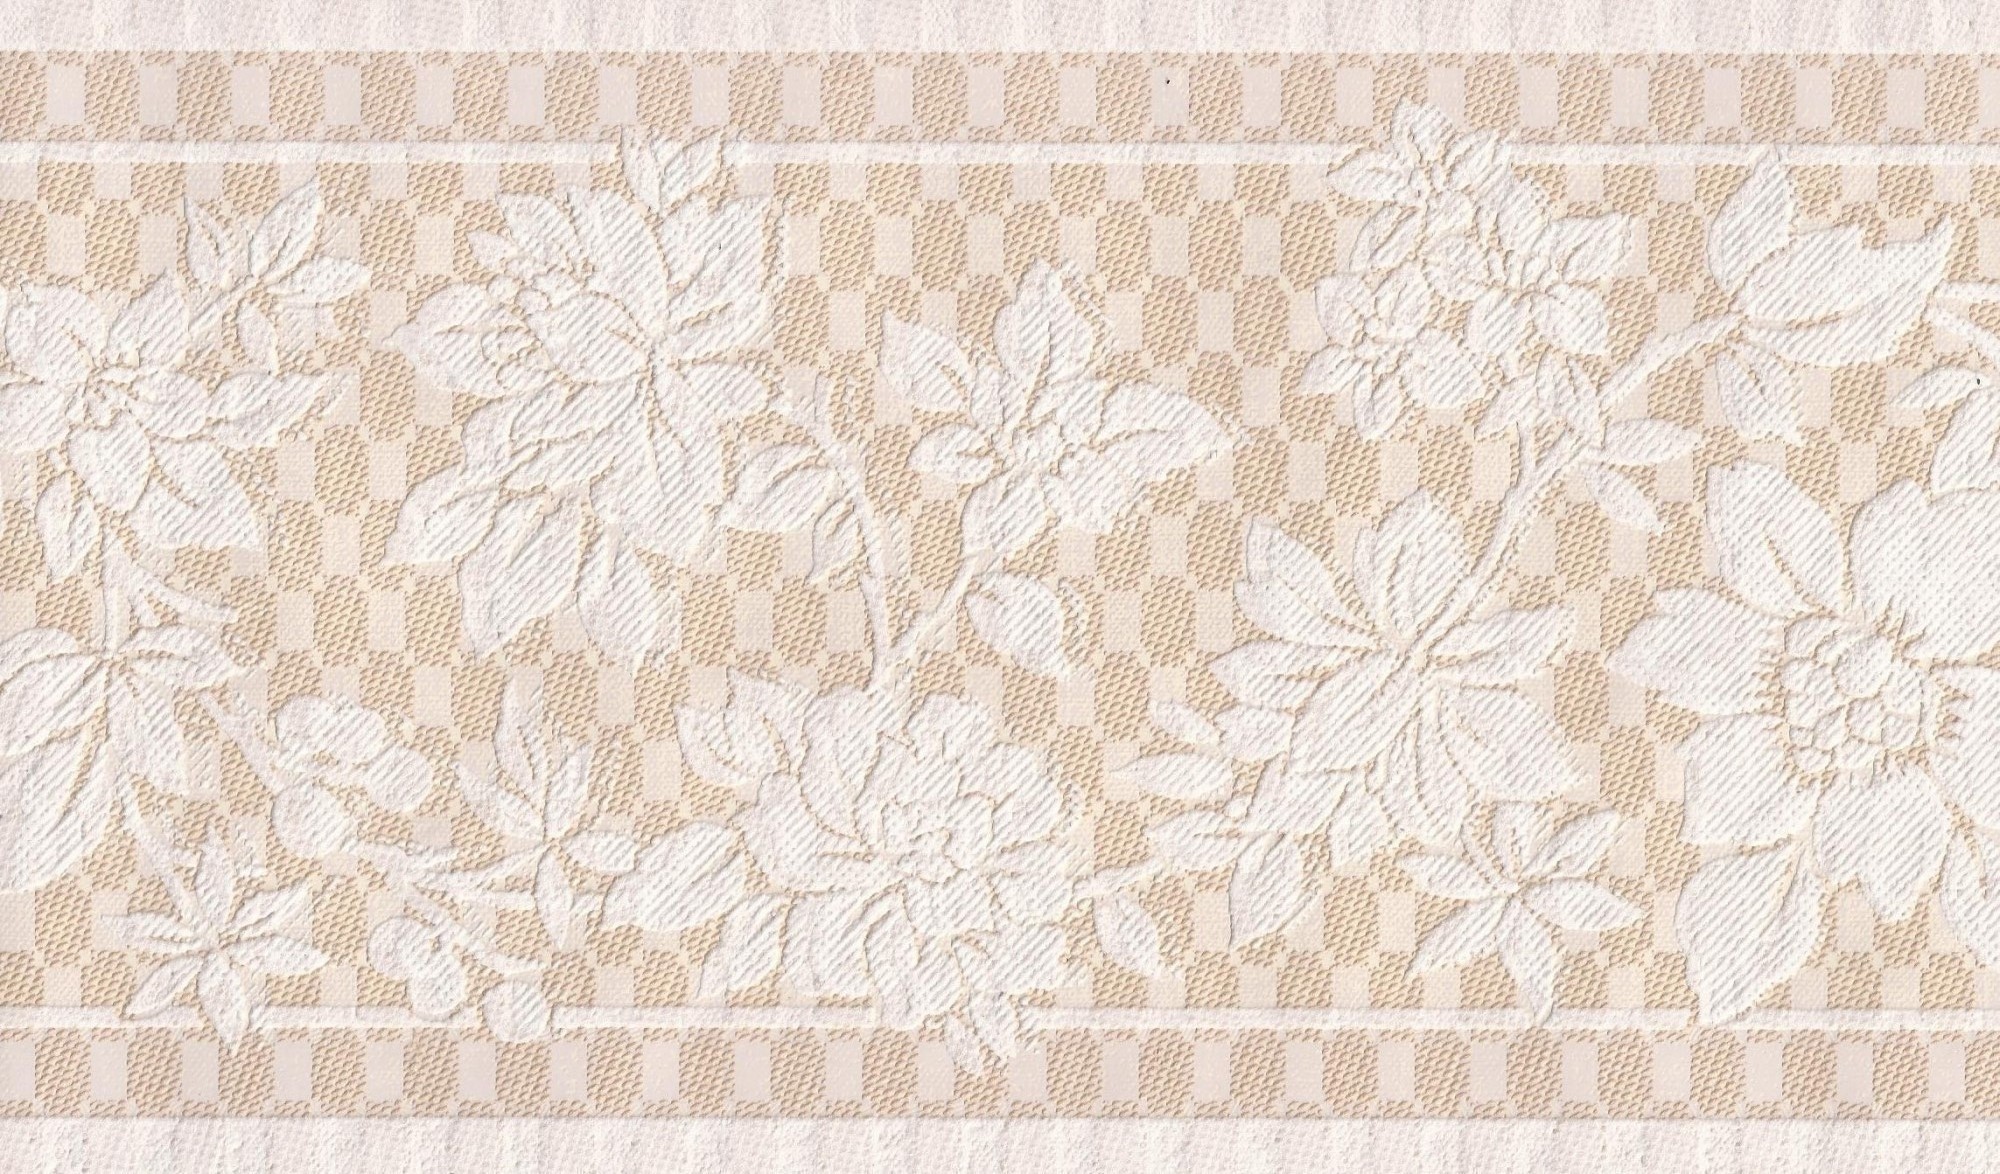 2000x1174 Floral Lace Textured Peach / White Border By Crown 44570